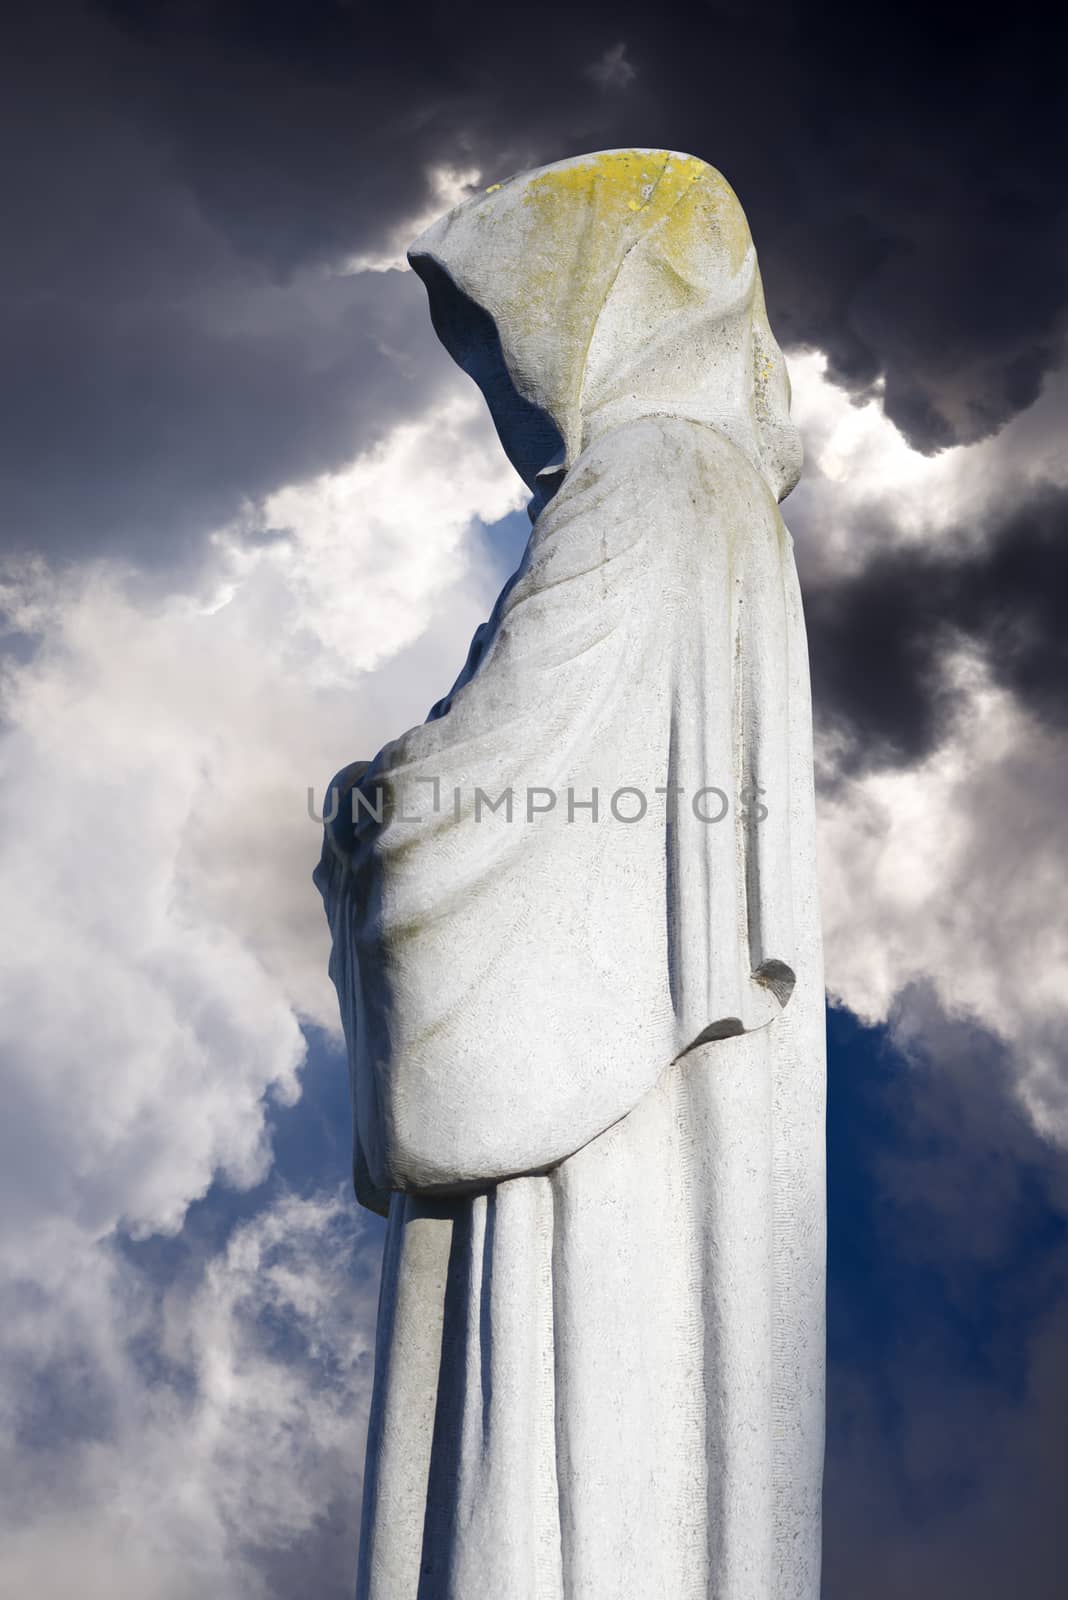 faceless monk statues at the town of fermoy in county cork ireland with clipping path